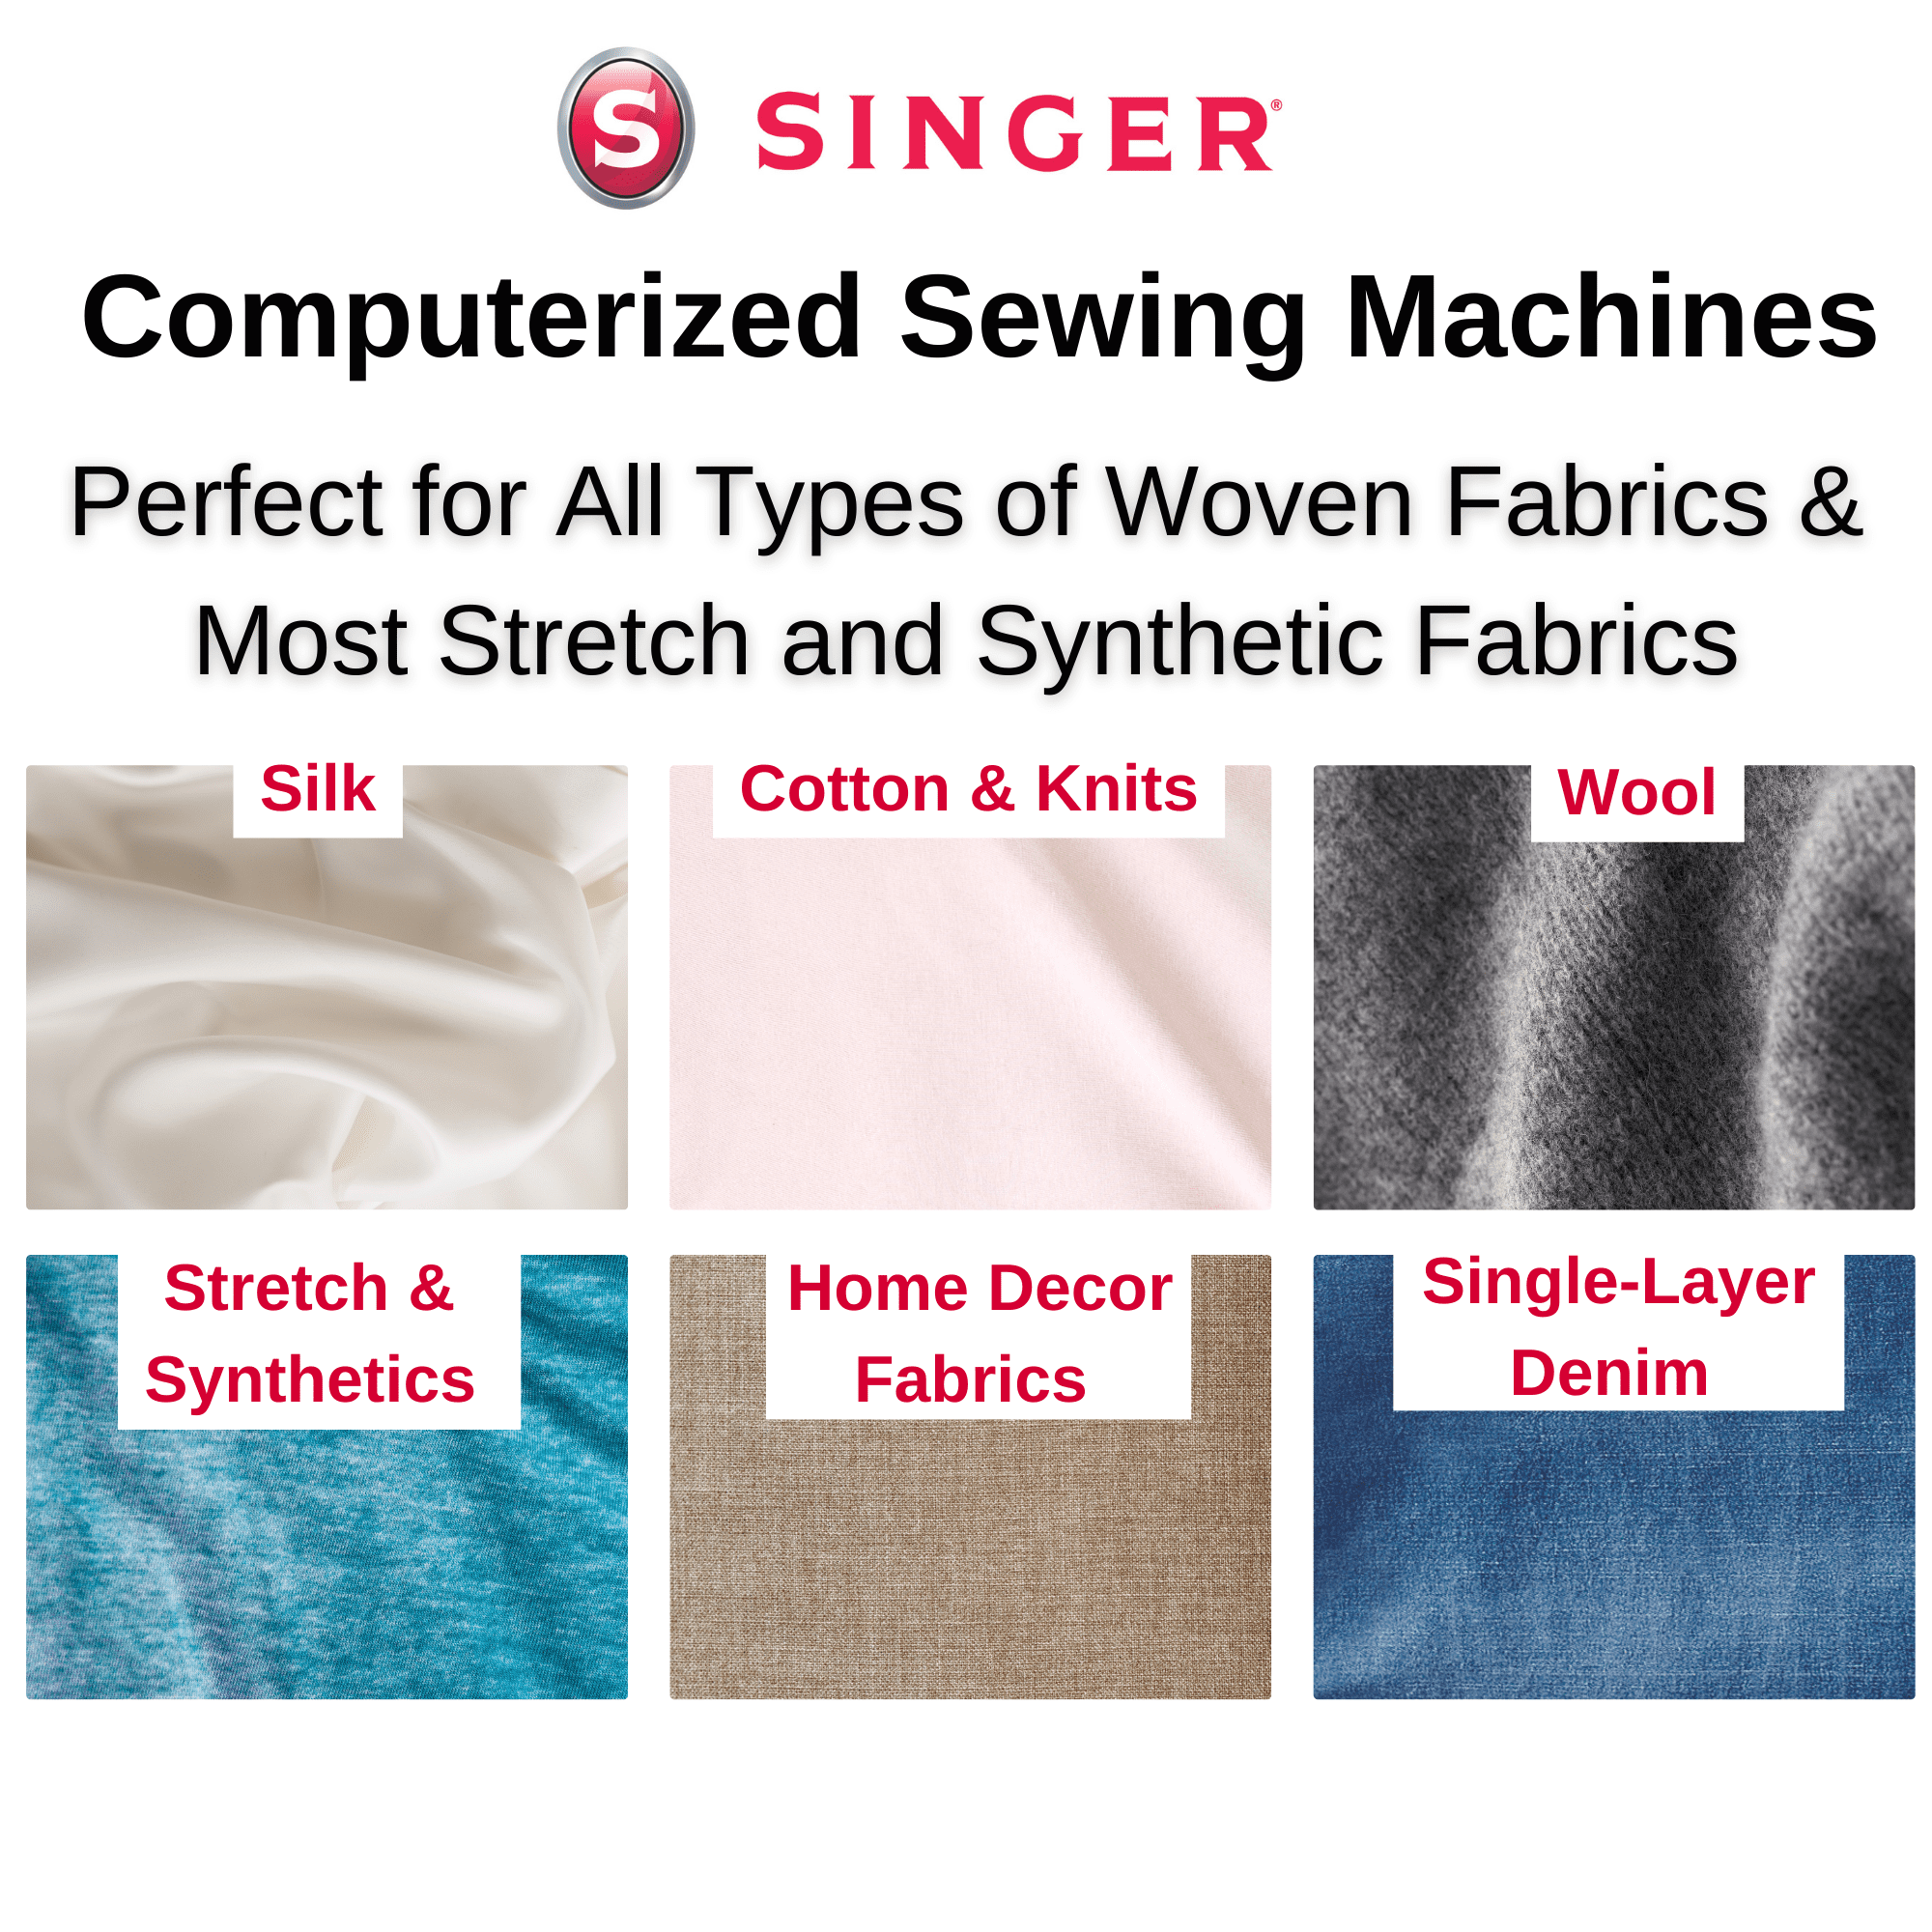 Singer 4432 Review - What's the Big Deal? - Arlington Sew